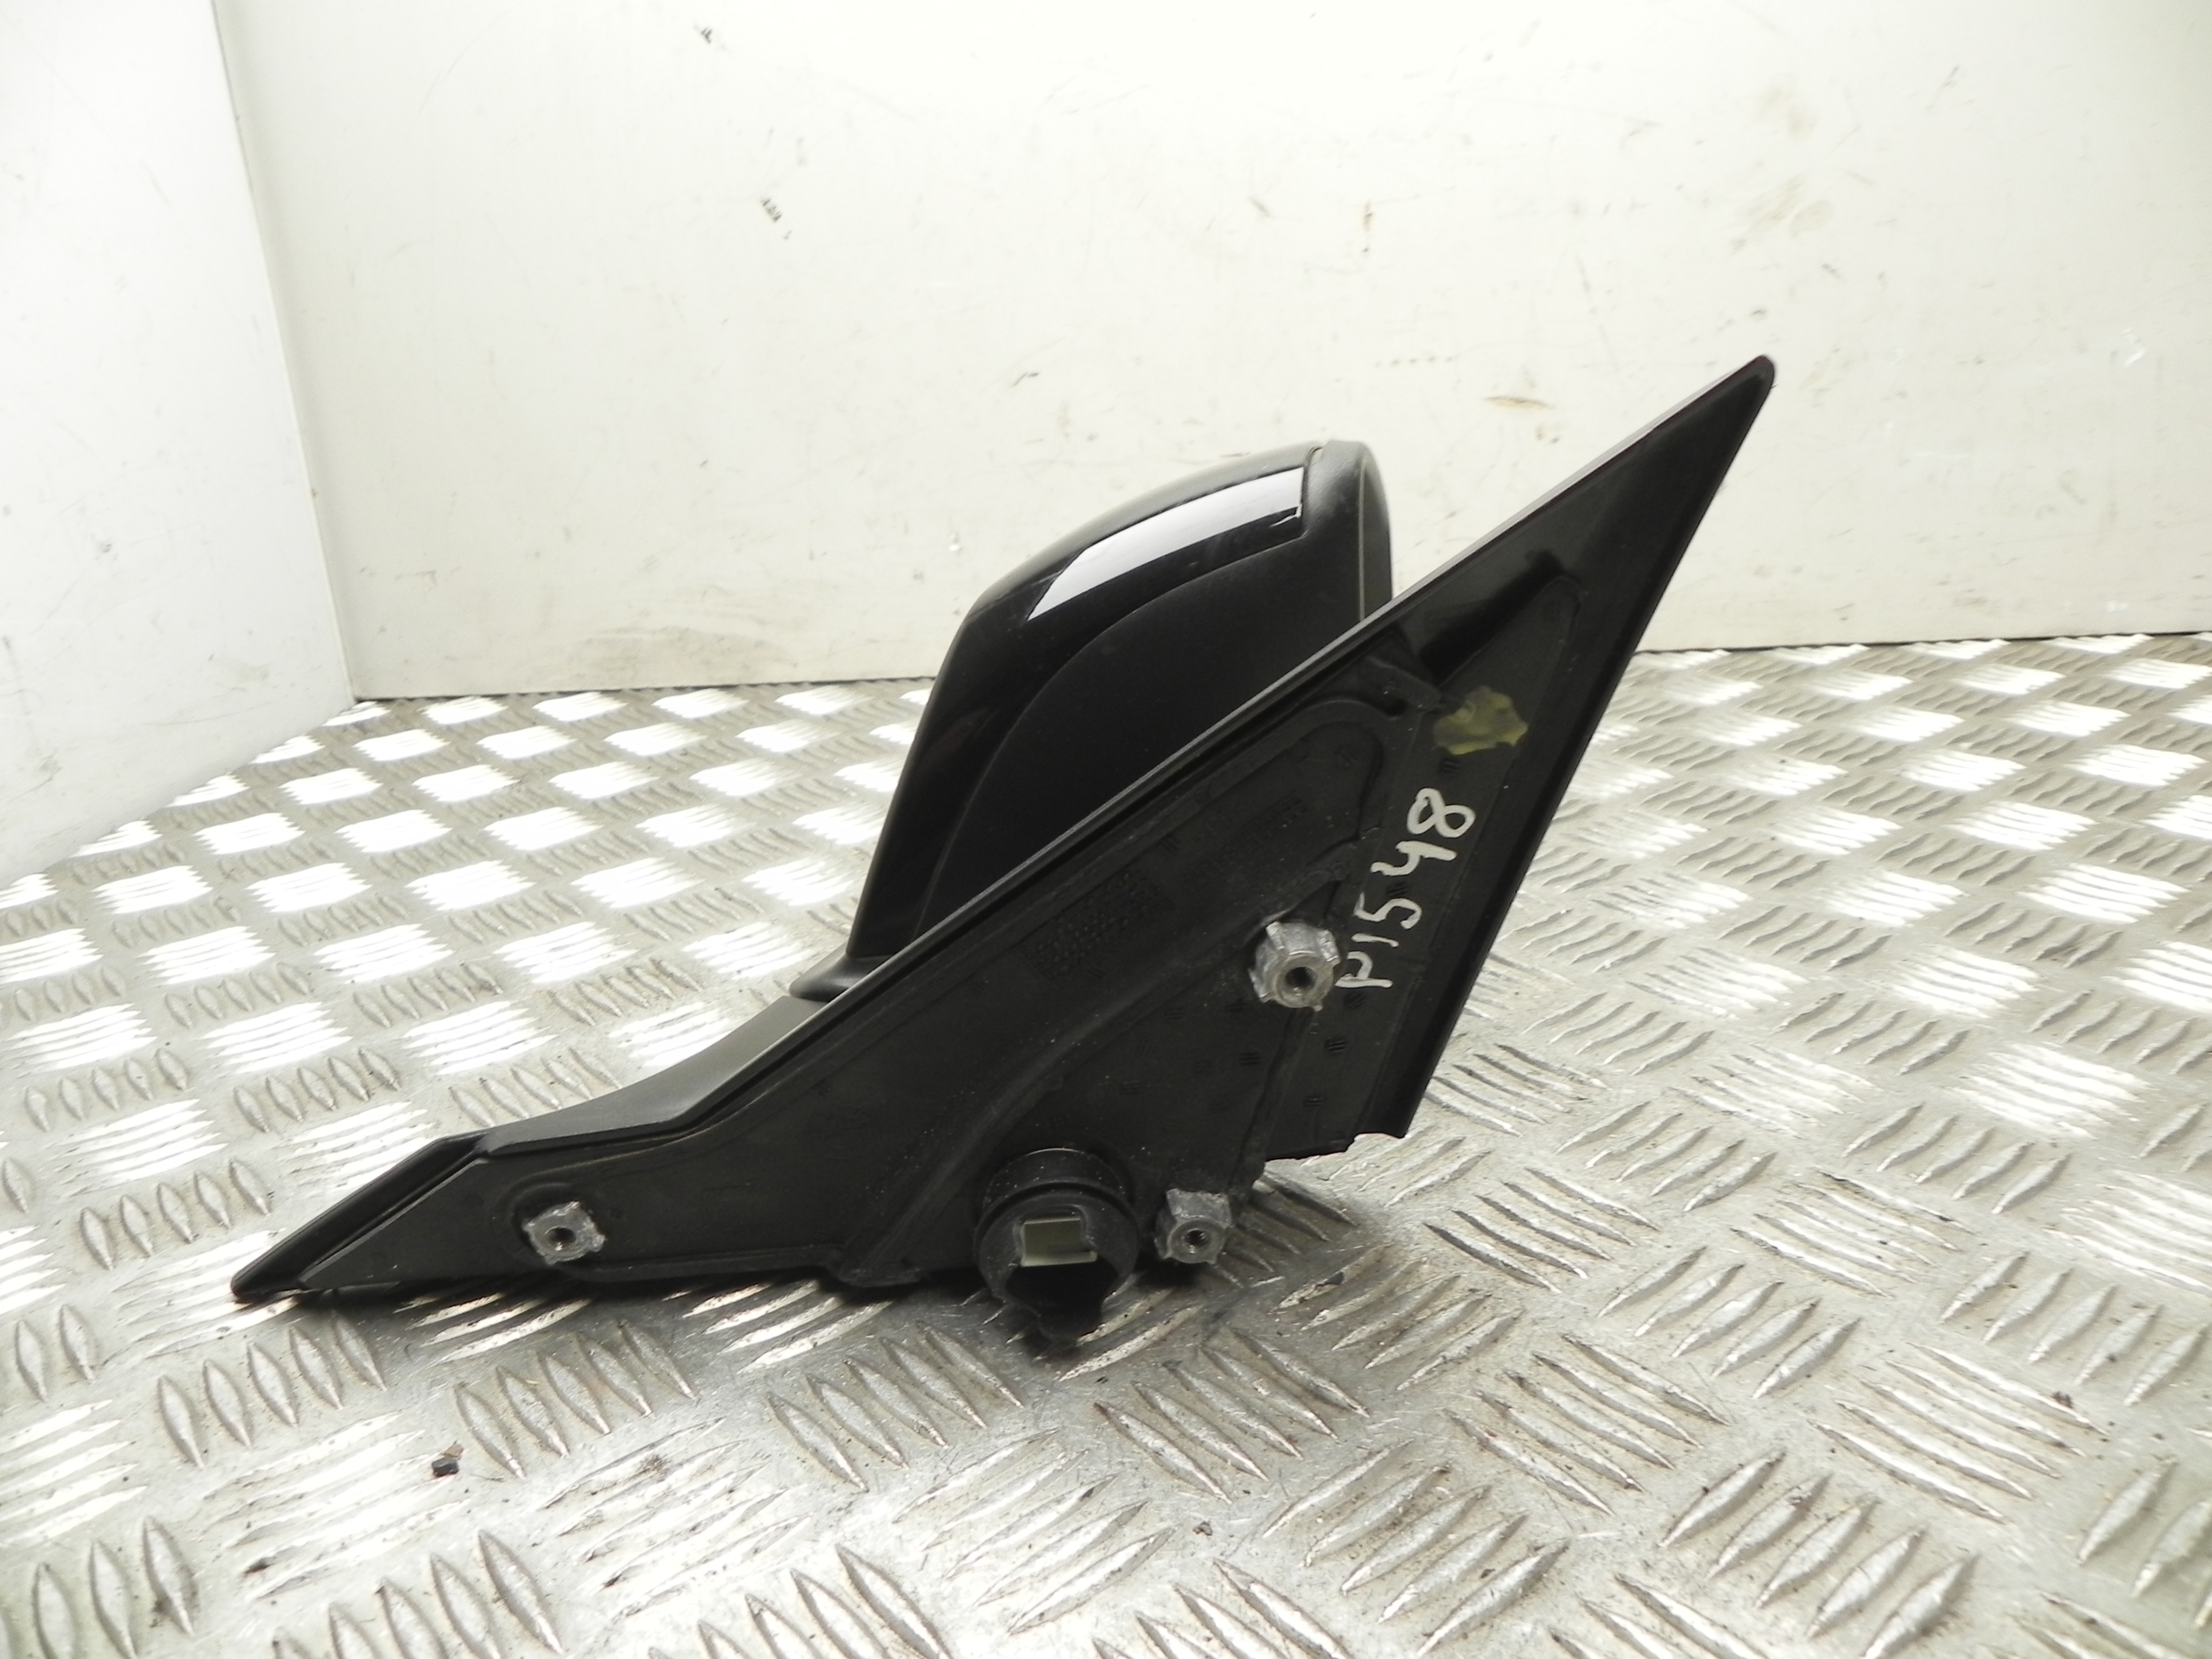 BMW 2 Series F22/F23 (2013-2020) Right Side Wing Mirror 20205002 23459963